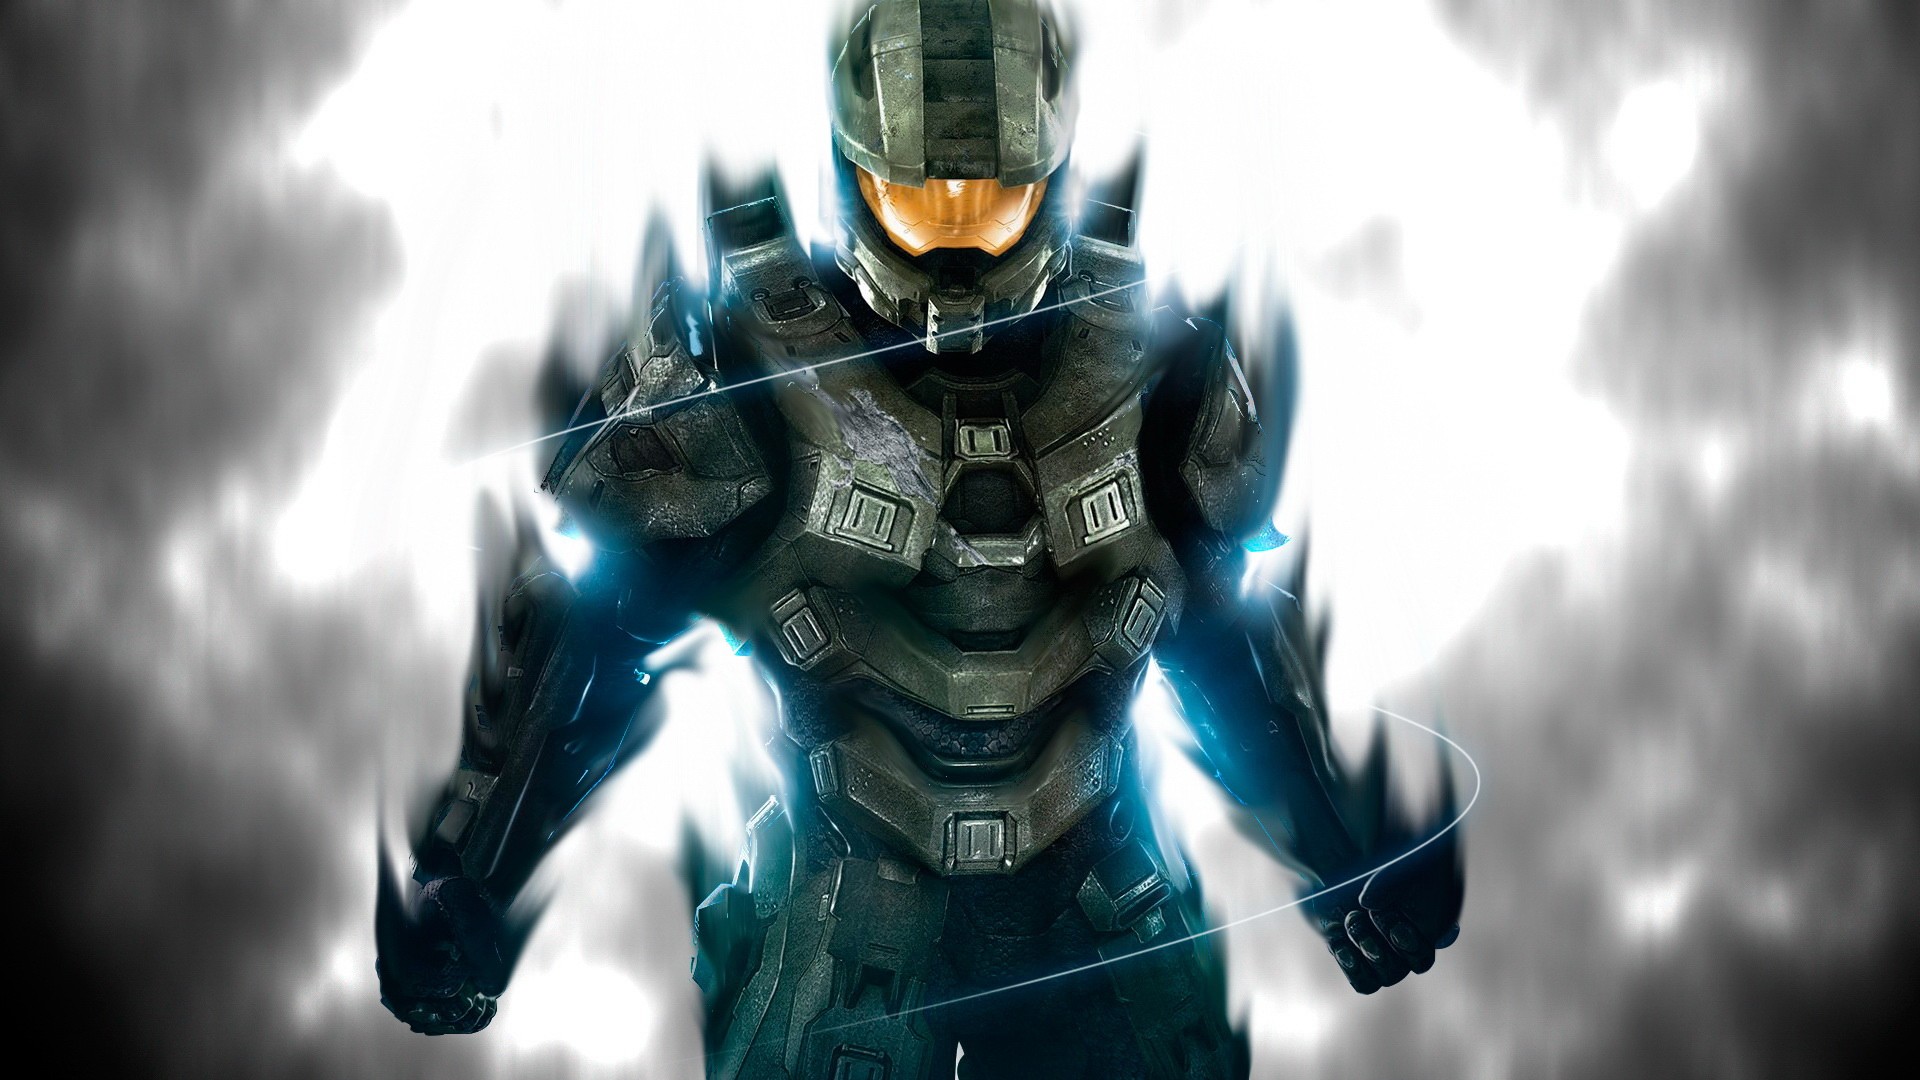 45 halo xbox 360 wallpapers download on wallpapersafari 45 halo xbox 360 wallpapers download